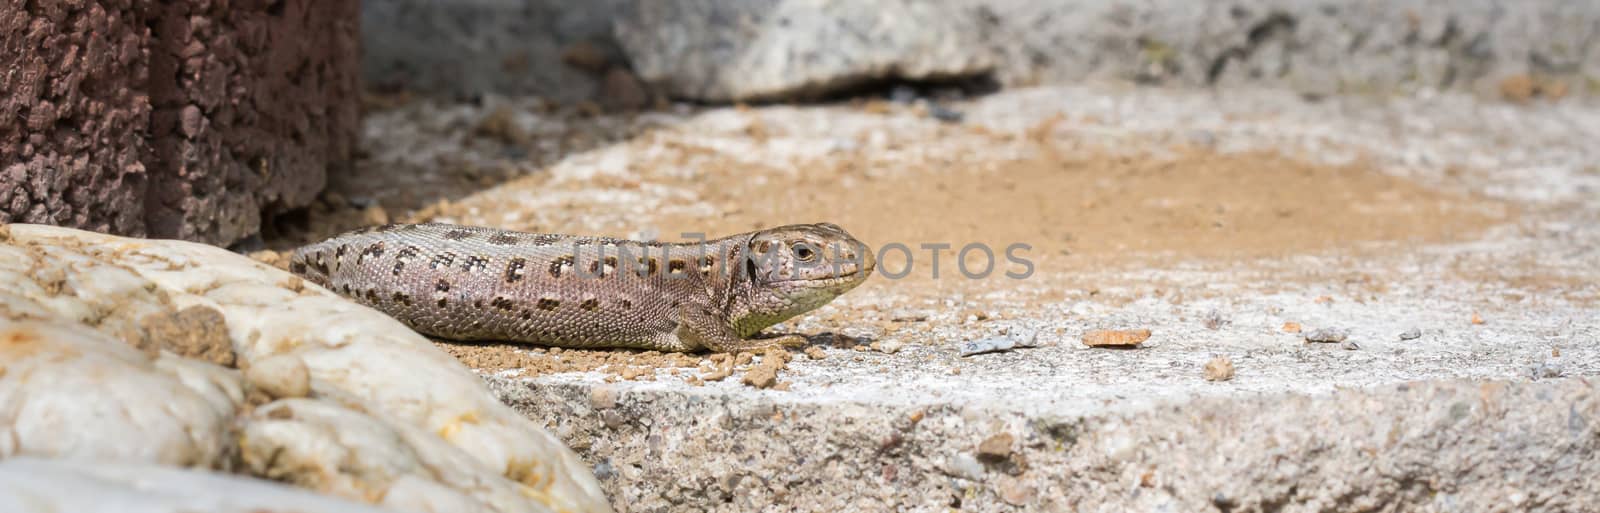 Little brown lizard out in the garden by sandra_fotodesign